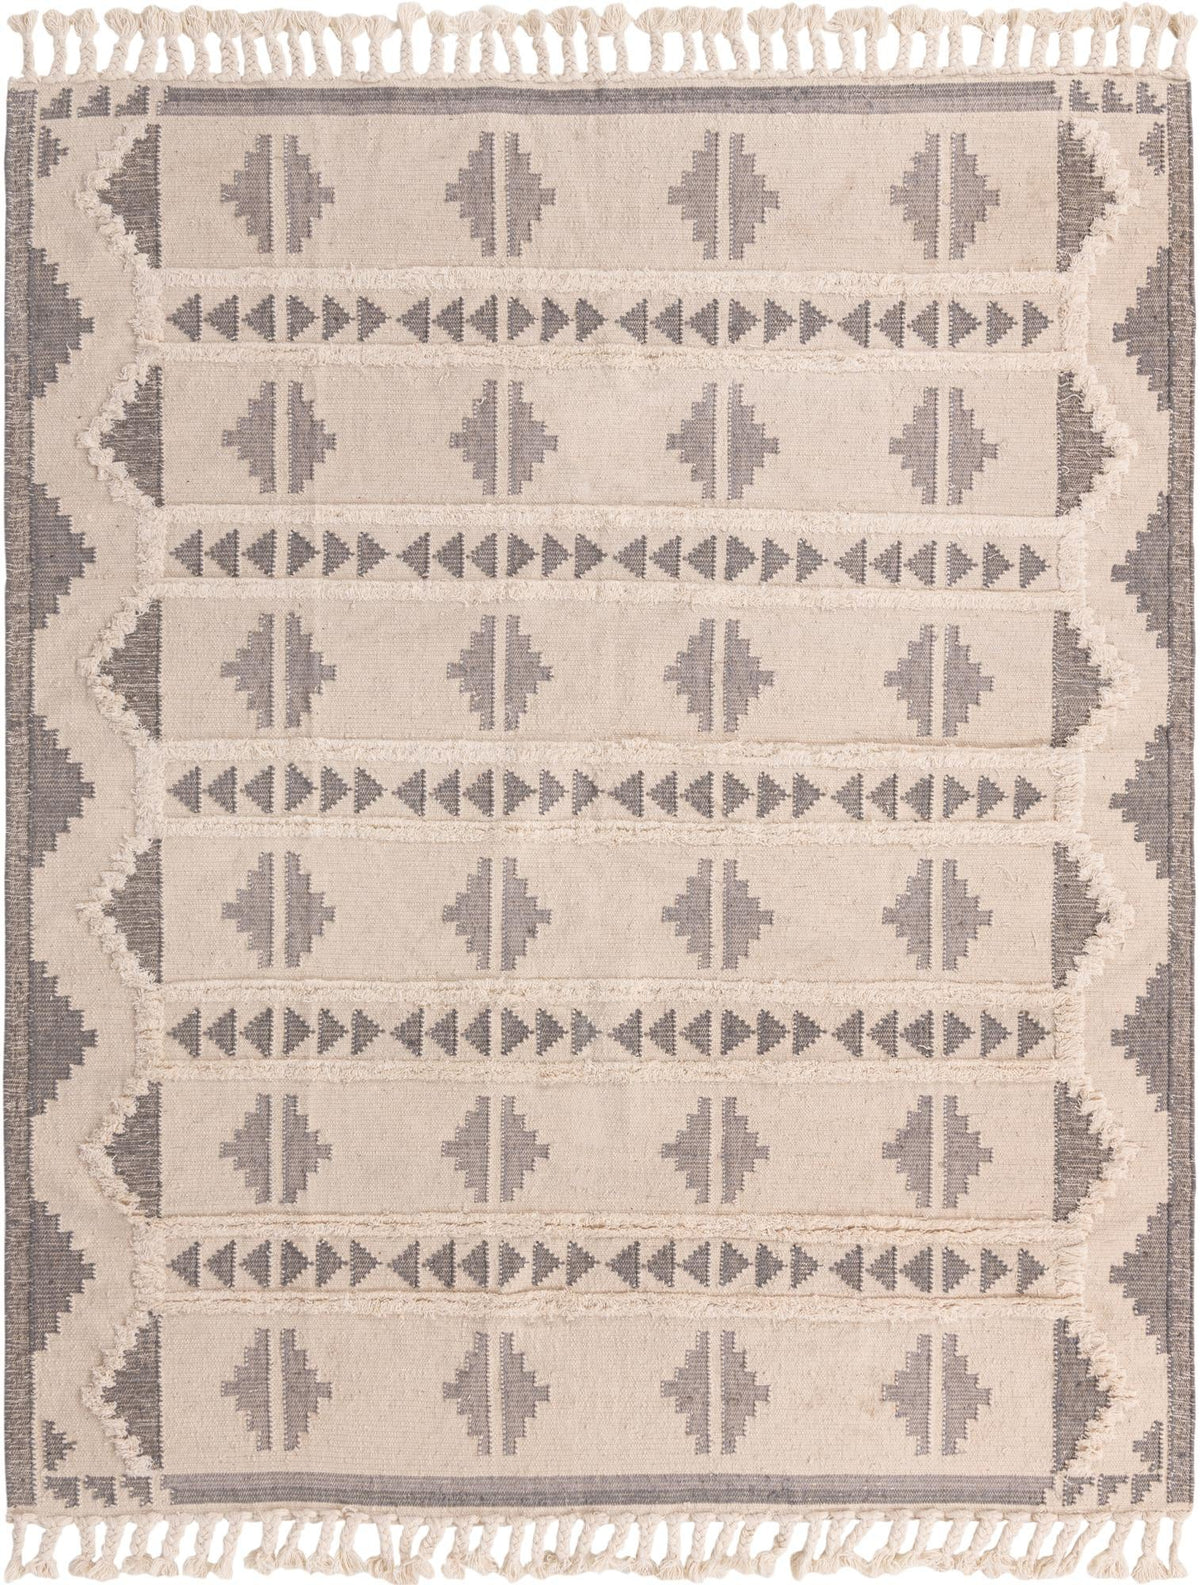 Sedona Sands Collection Area Rug - BellRock Rectangle Gray and White Main